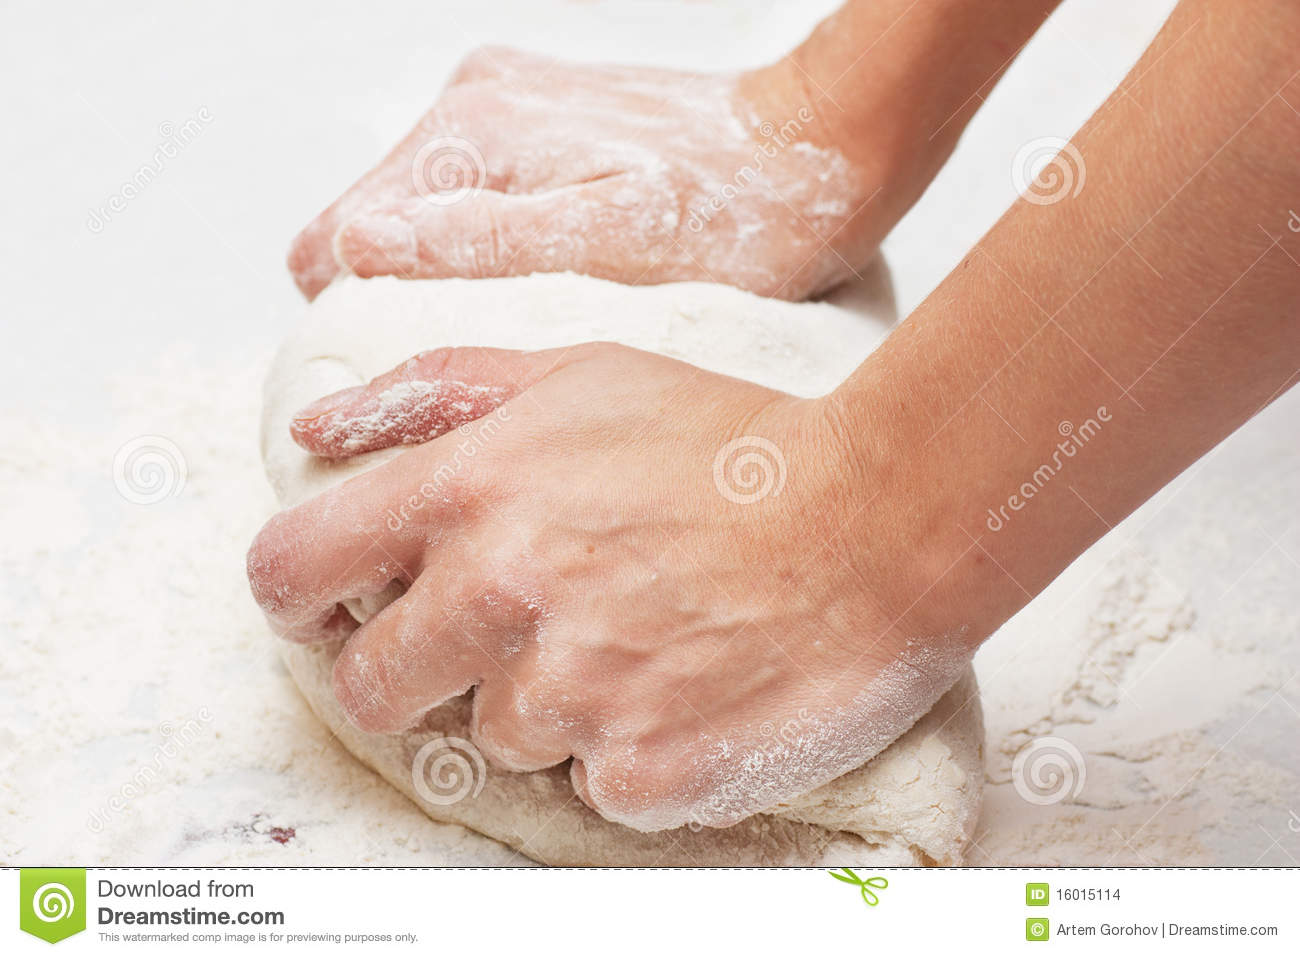 Kneading Dough Stock Images   Image  16015114